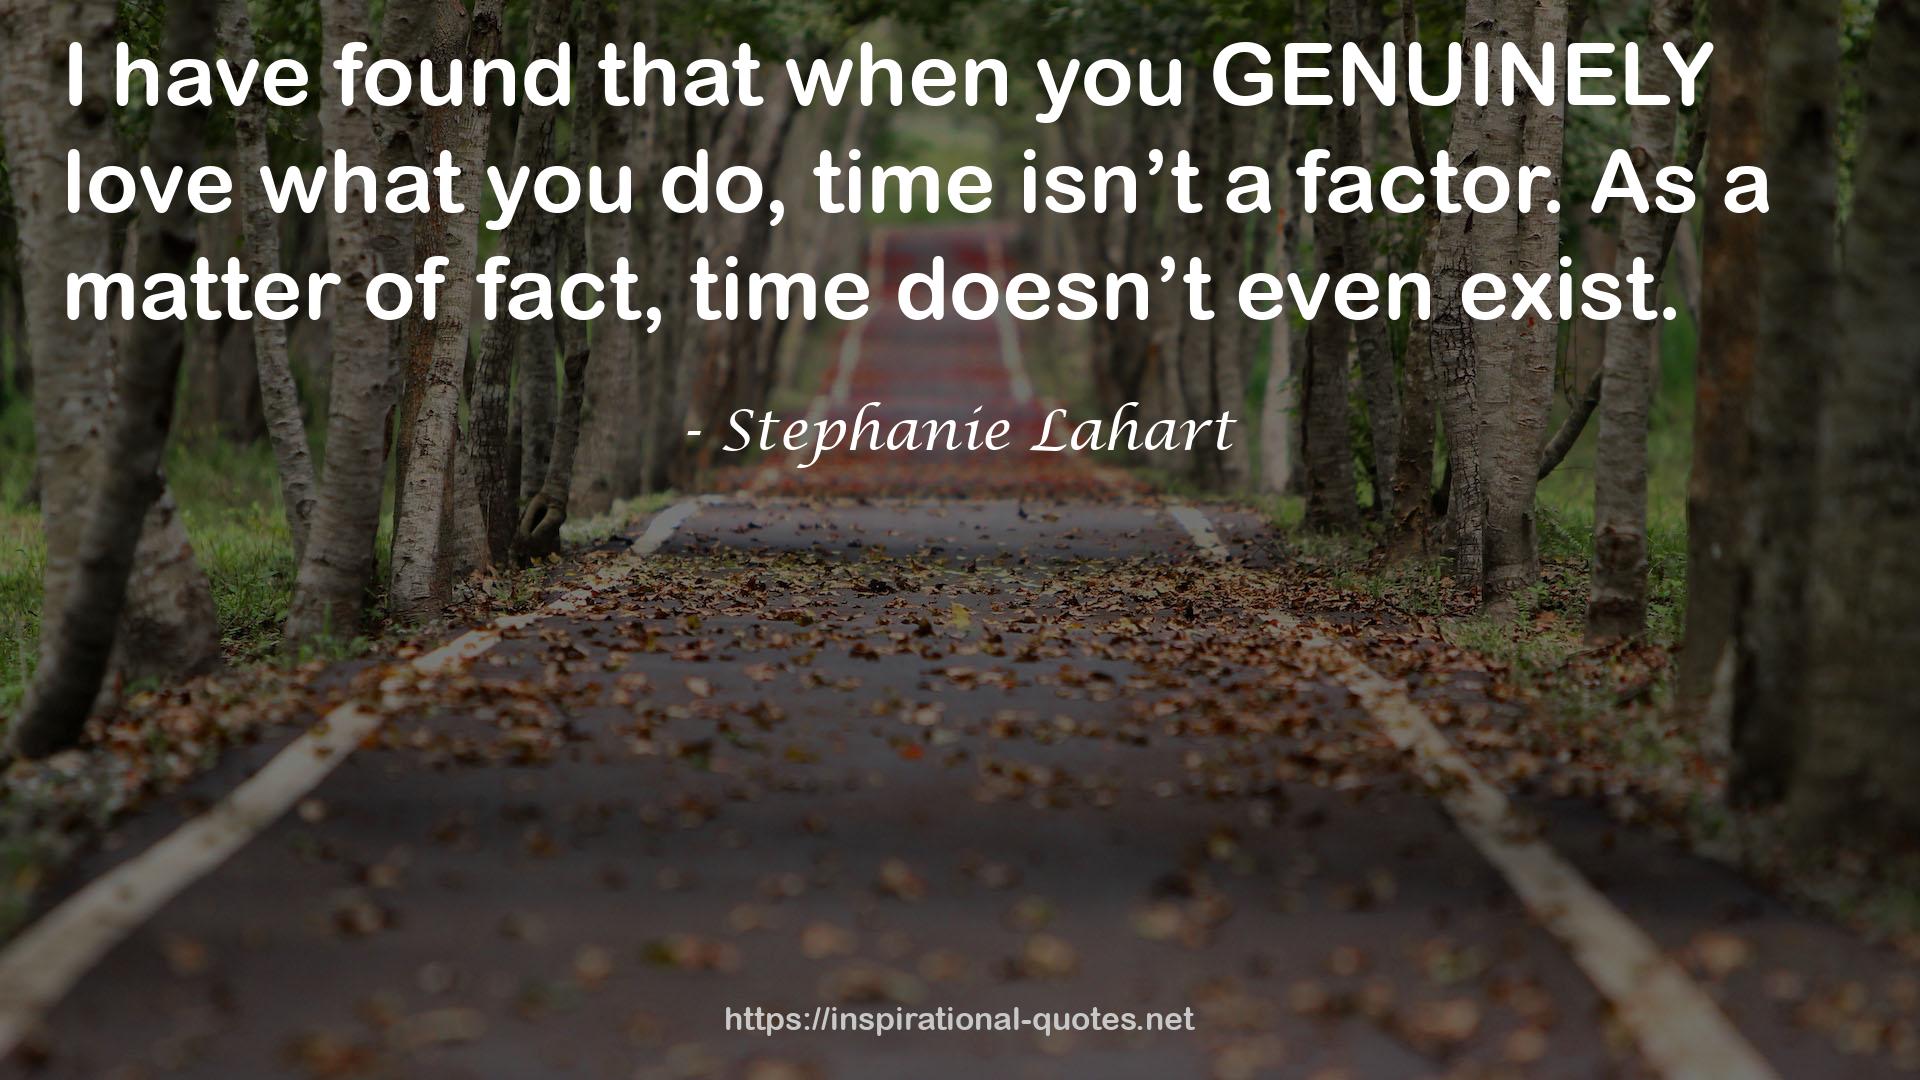 Stephanie Lahart quote : I have found that when you GENUINELY love what you do, time isn’t a factor. As a matter of fact, time doesn’t even exist.